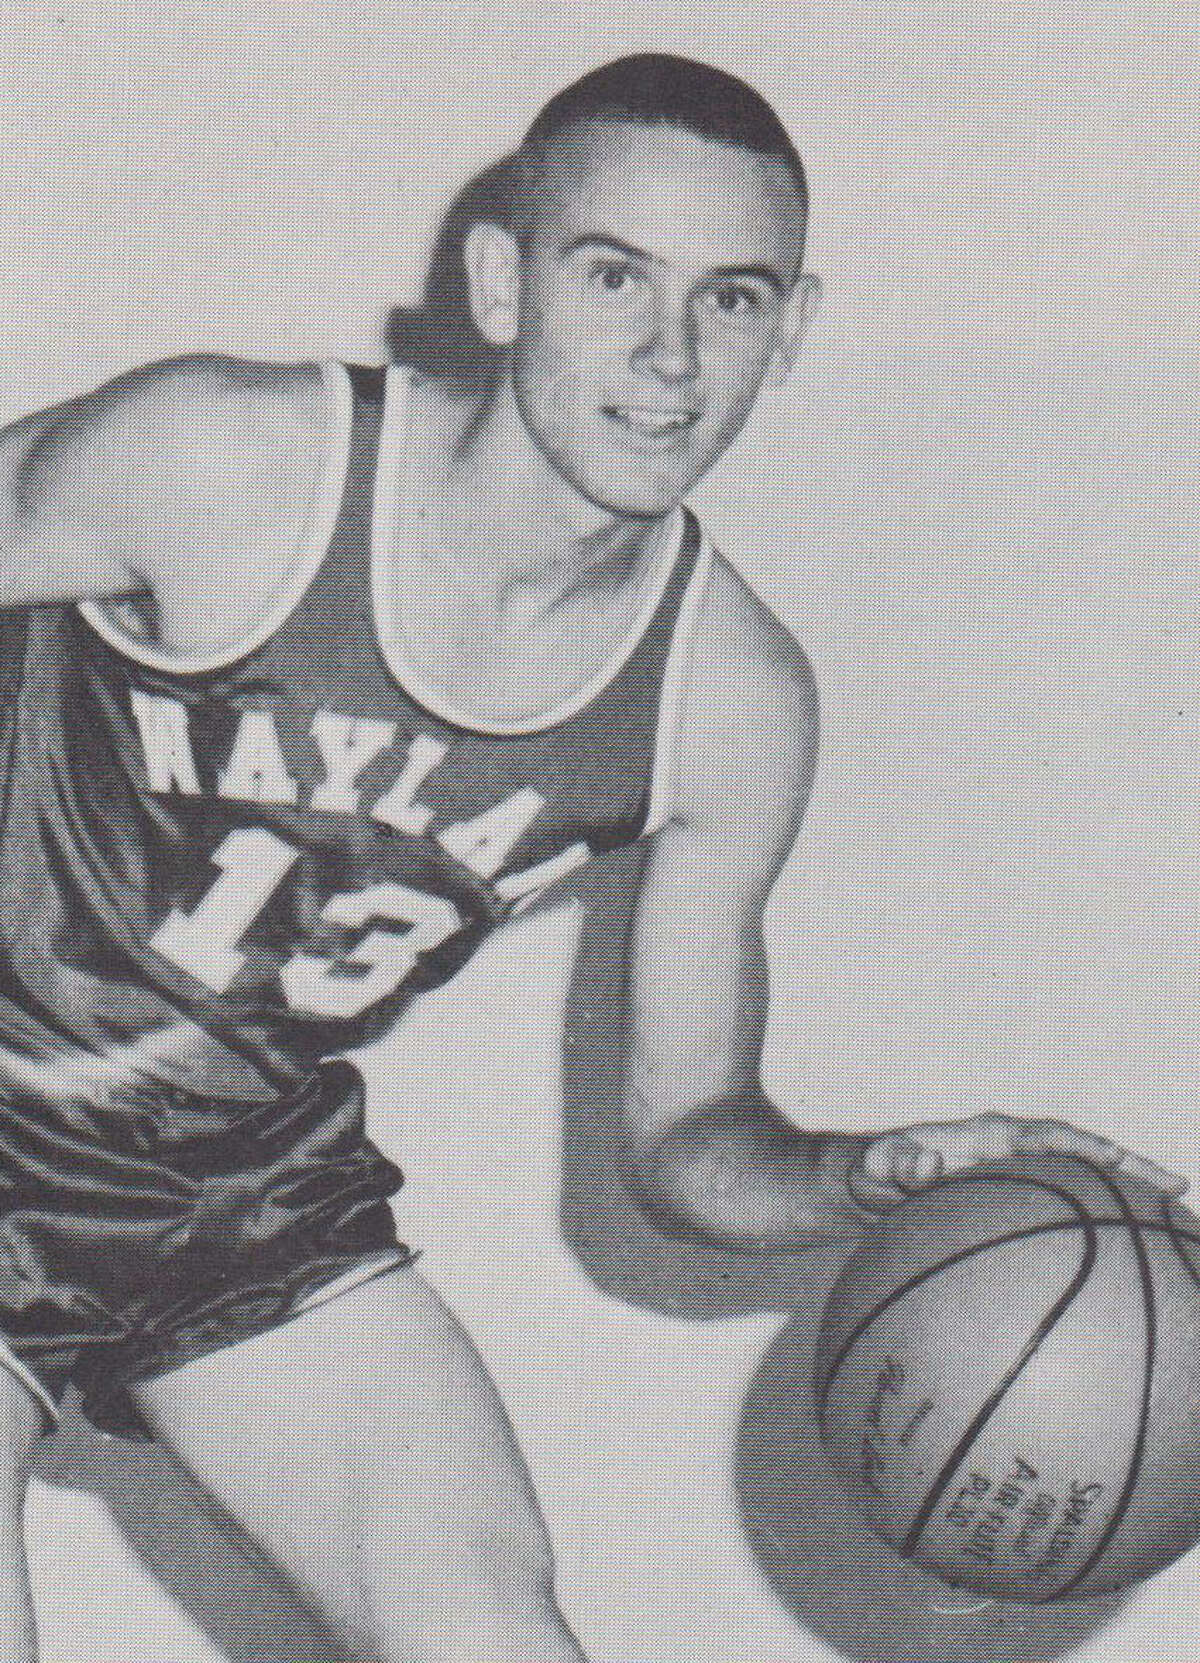 Bobby Jack Frye played for the Wayland Pioneers from 1958-61 after originally entering in college on a Flying Queens basketball scholarship.